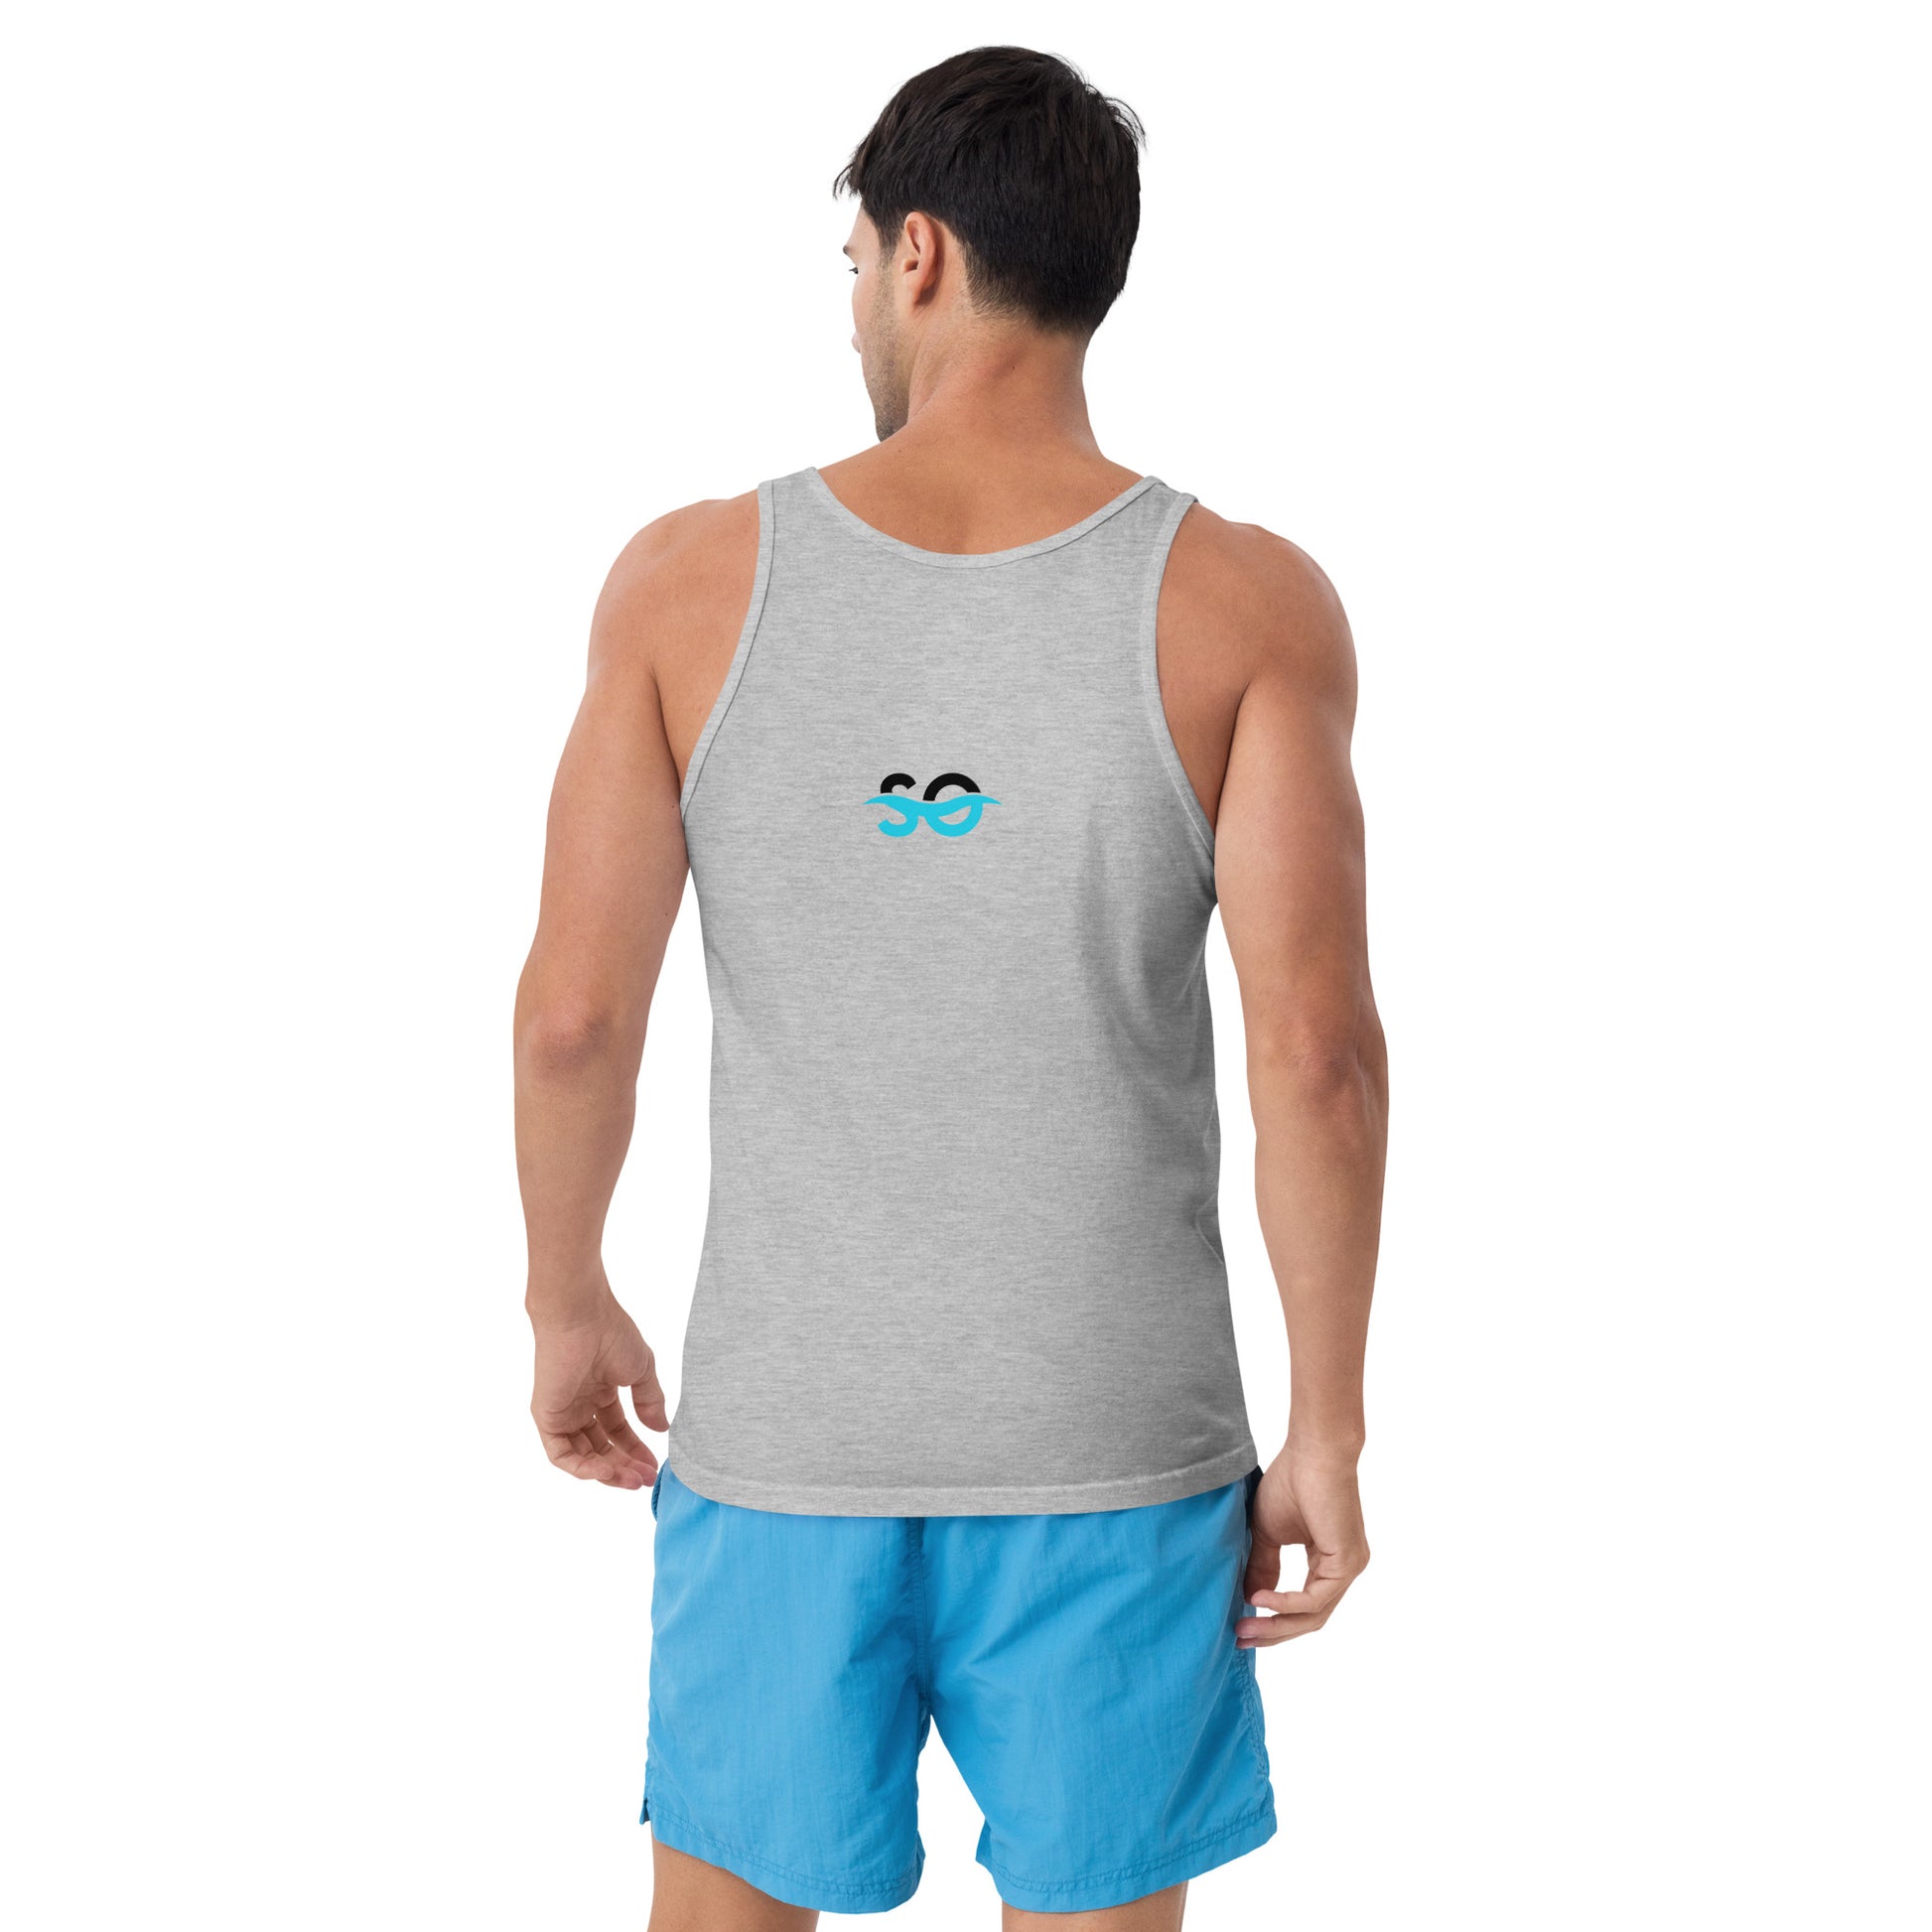 a man wearing a grey tank top with a blue logo